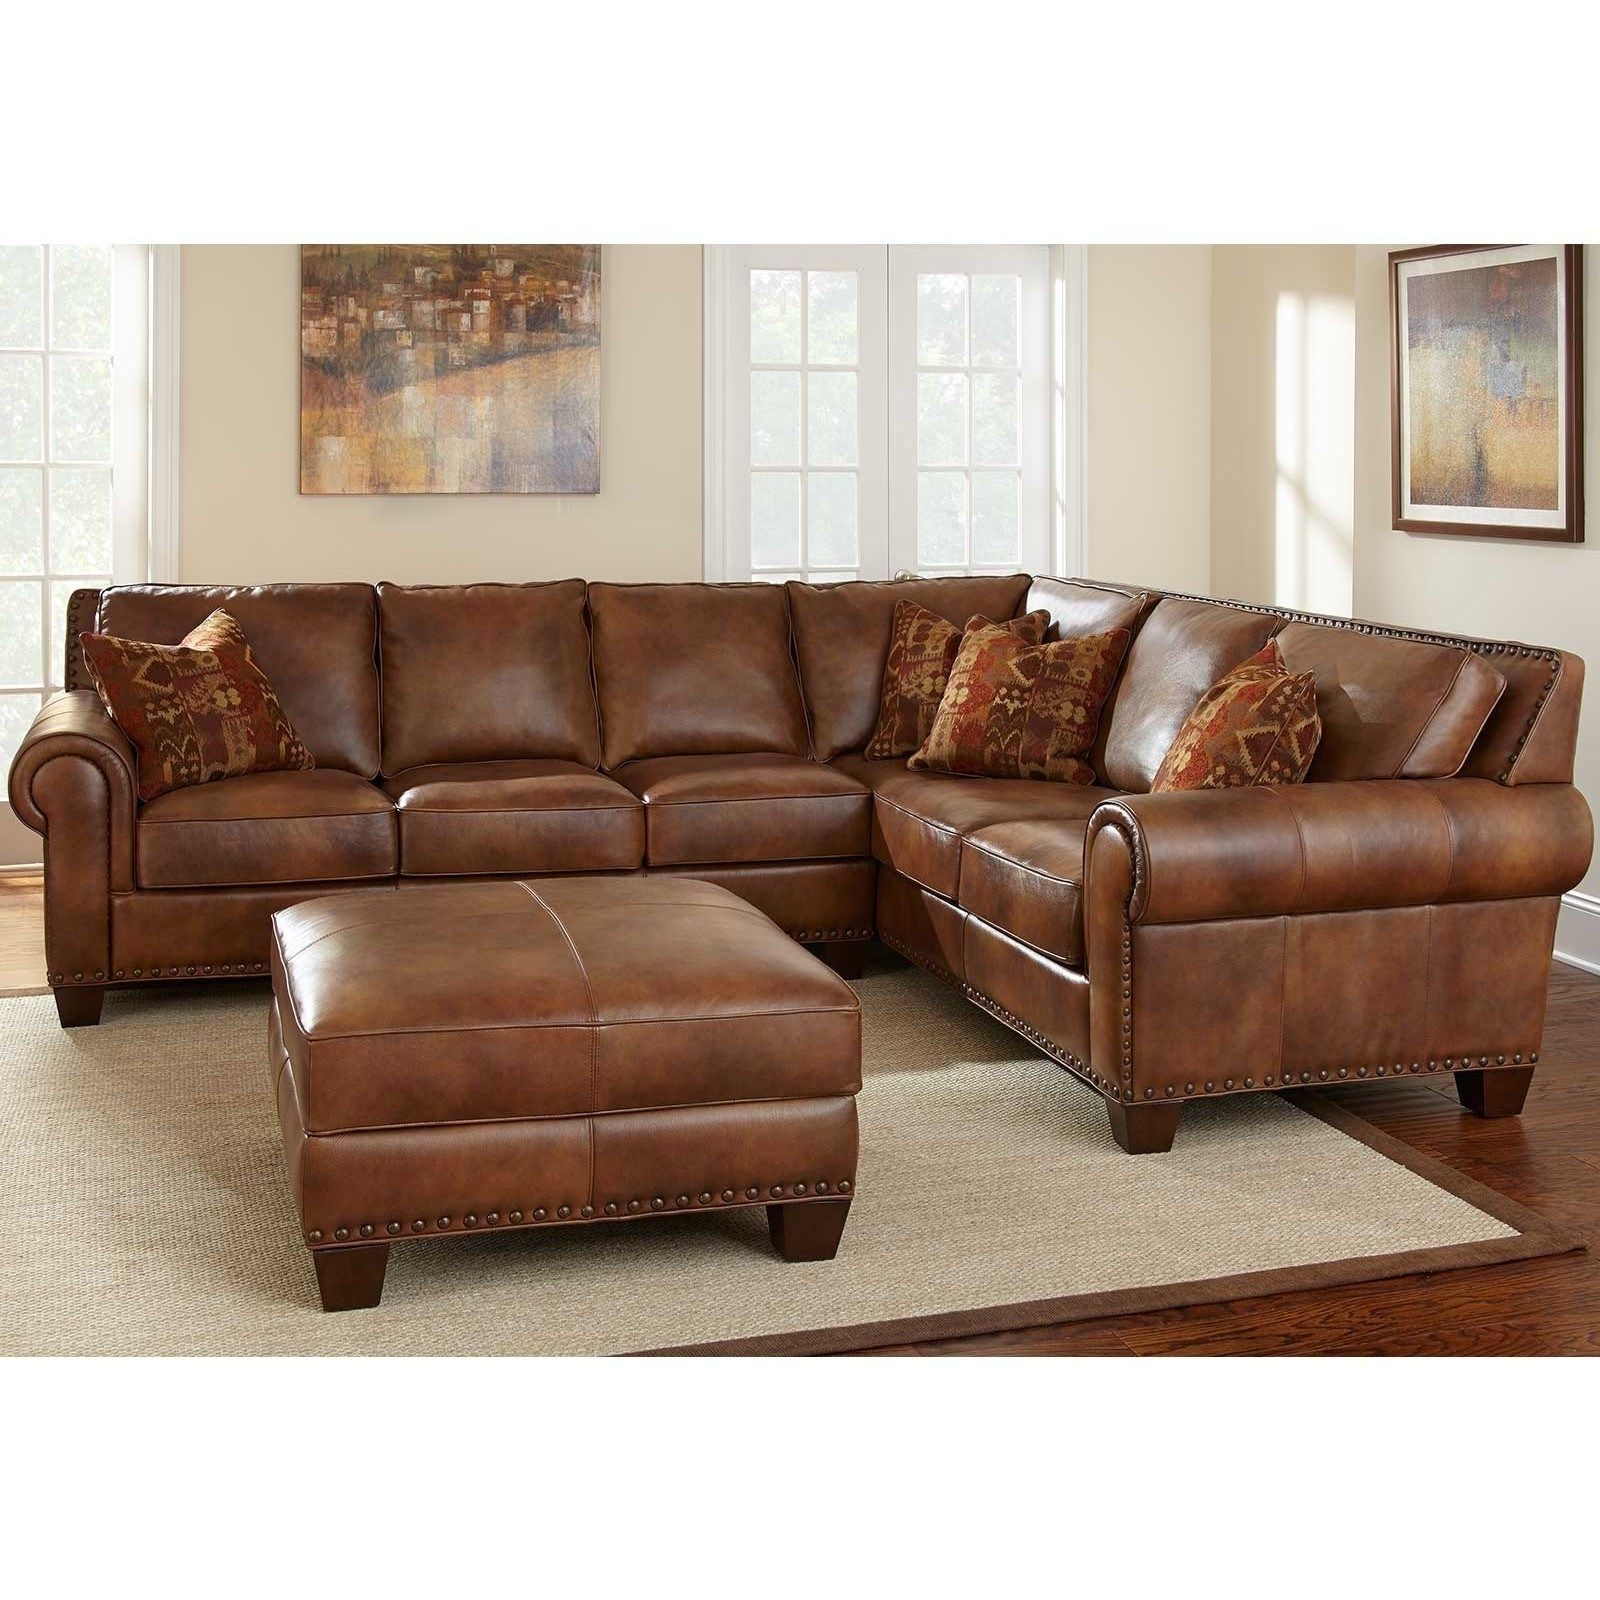 Modernofa Kijiji Calgary Remarkable Luxury Brown Leather Couches For Kijiji Calgary Sectional Sofas (View 4 of 10)